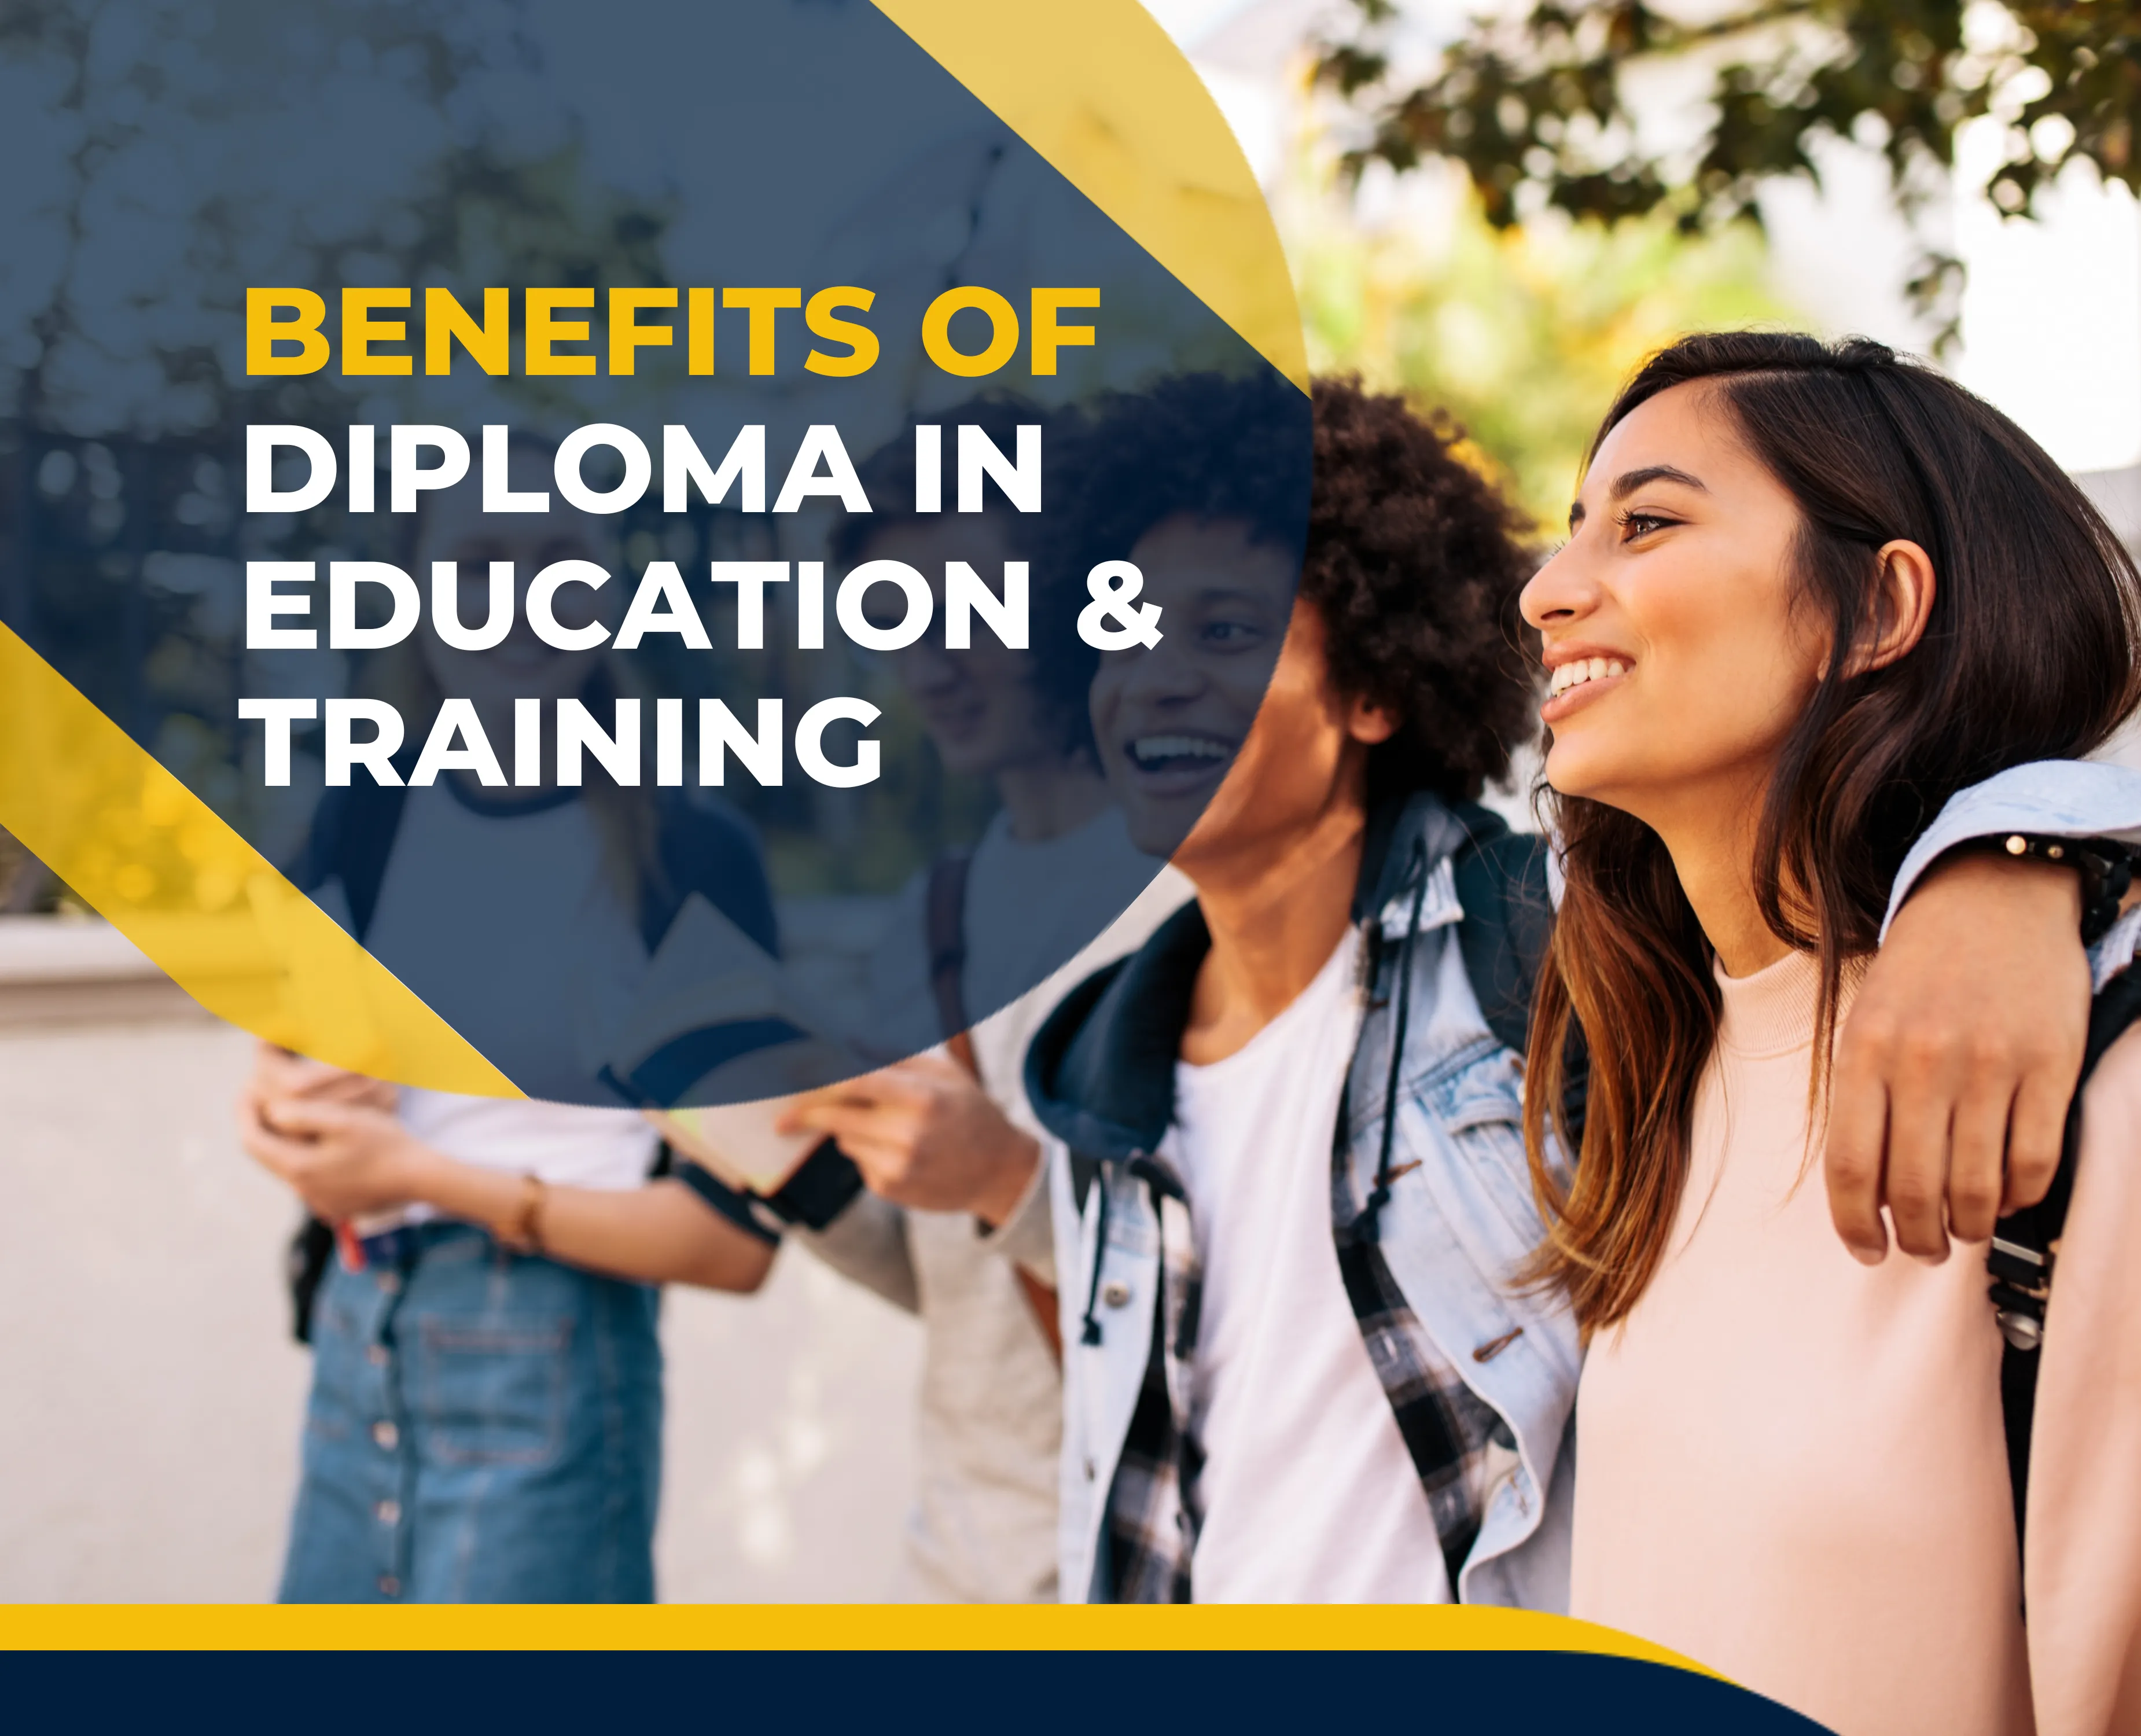 Benefits of Diploma in education and training in the UK